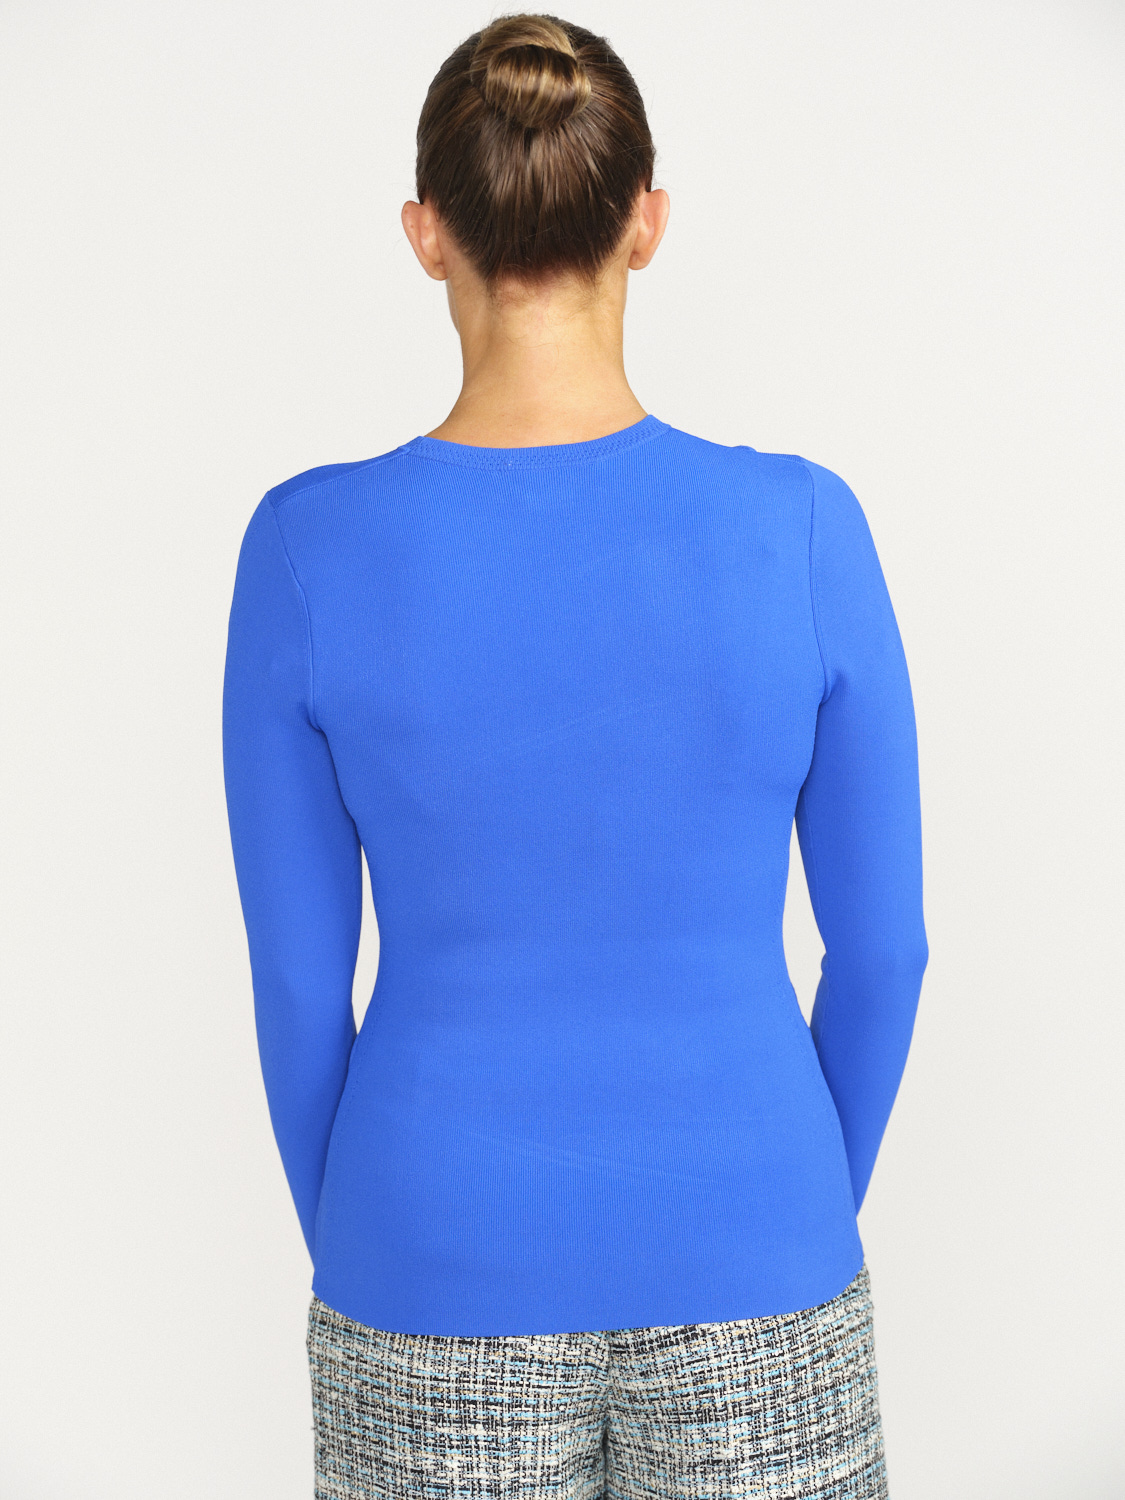 Victoria Beckham Cut Out Shirt - Figure-hugging long-sleeved shirt with cut-outs blue 36